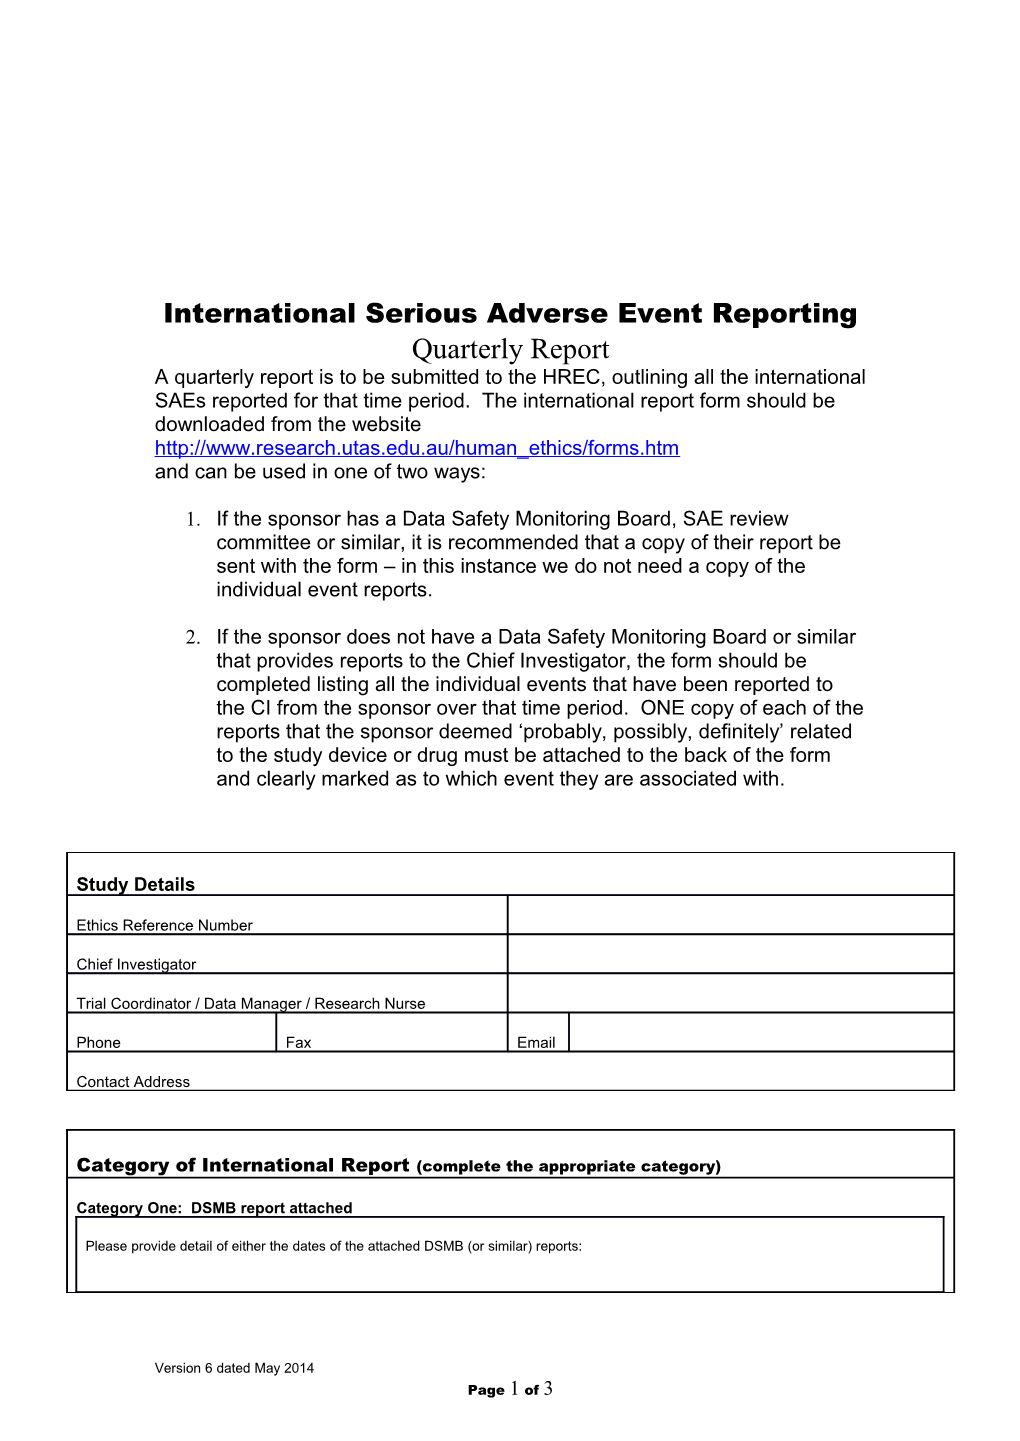 International Serious Adverse Event Reporting